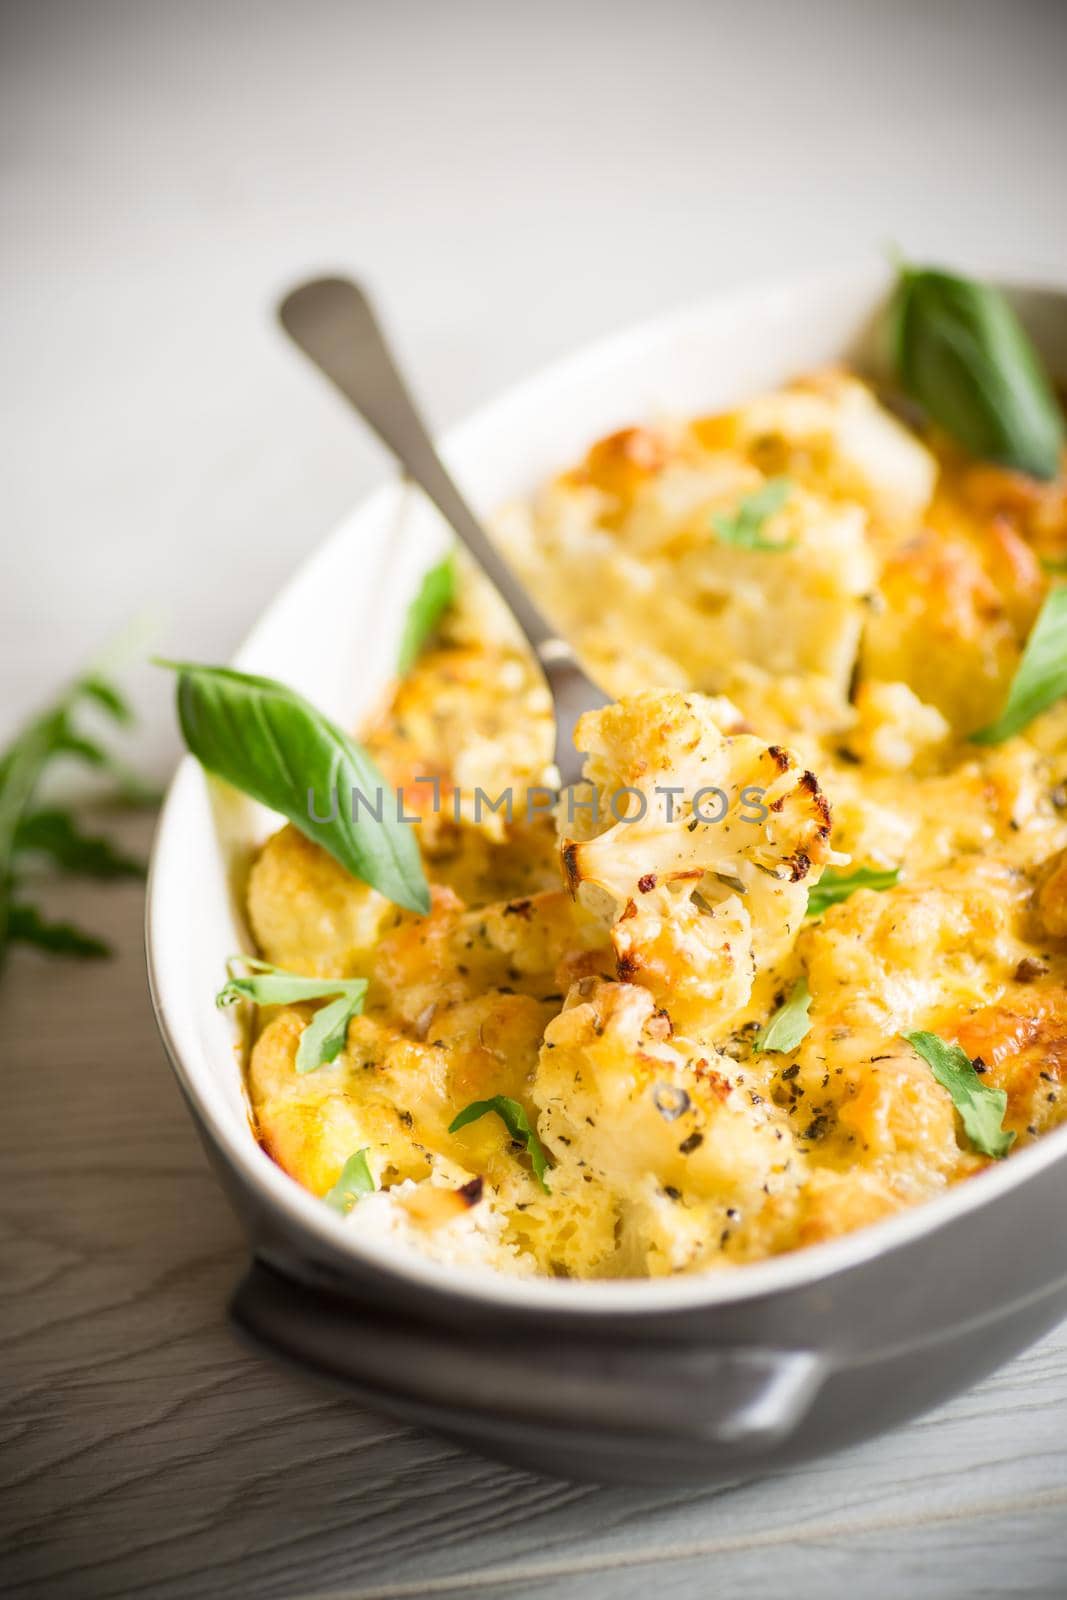 baked cauliflower with vegetables and cheese and scrambled eggs in a ceramic dish